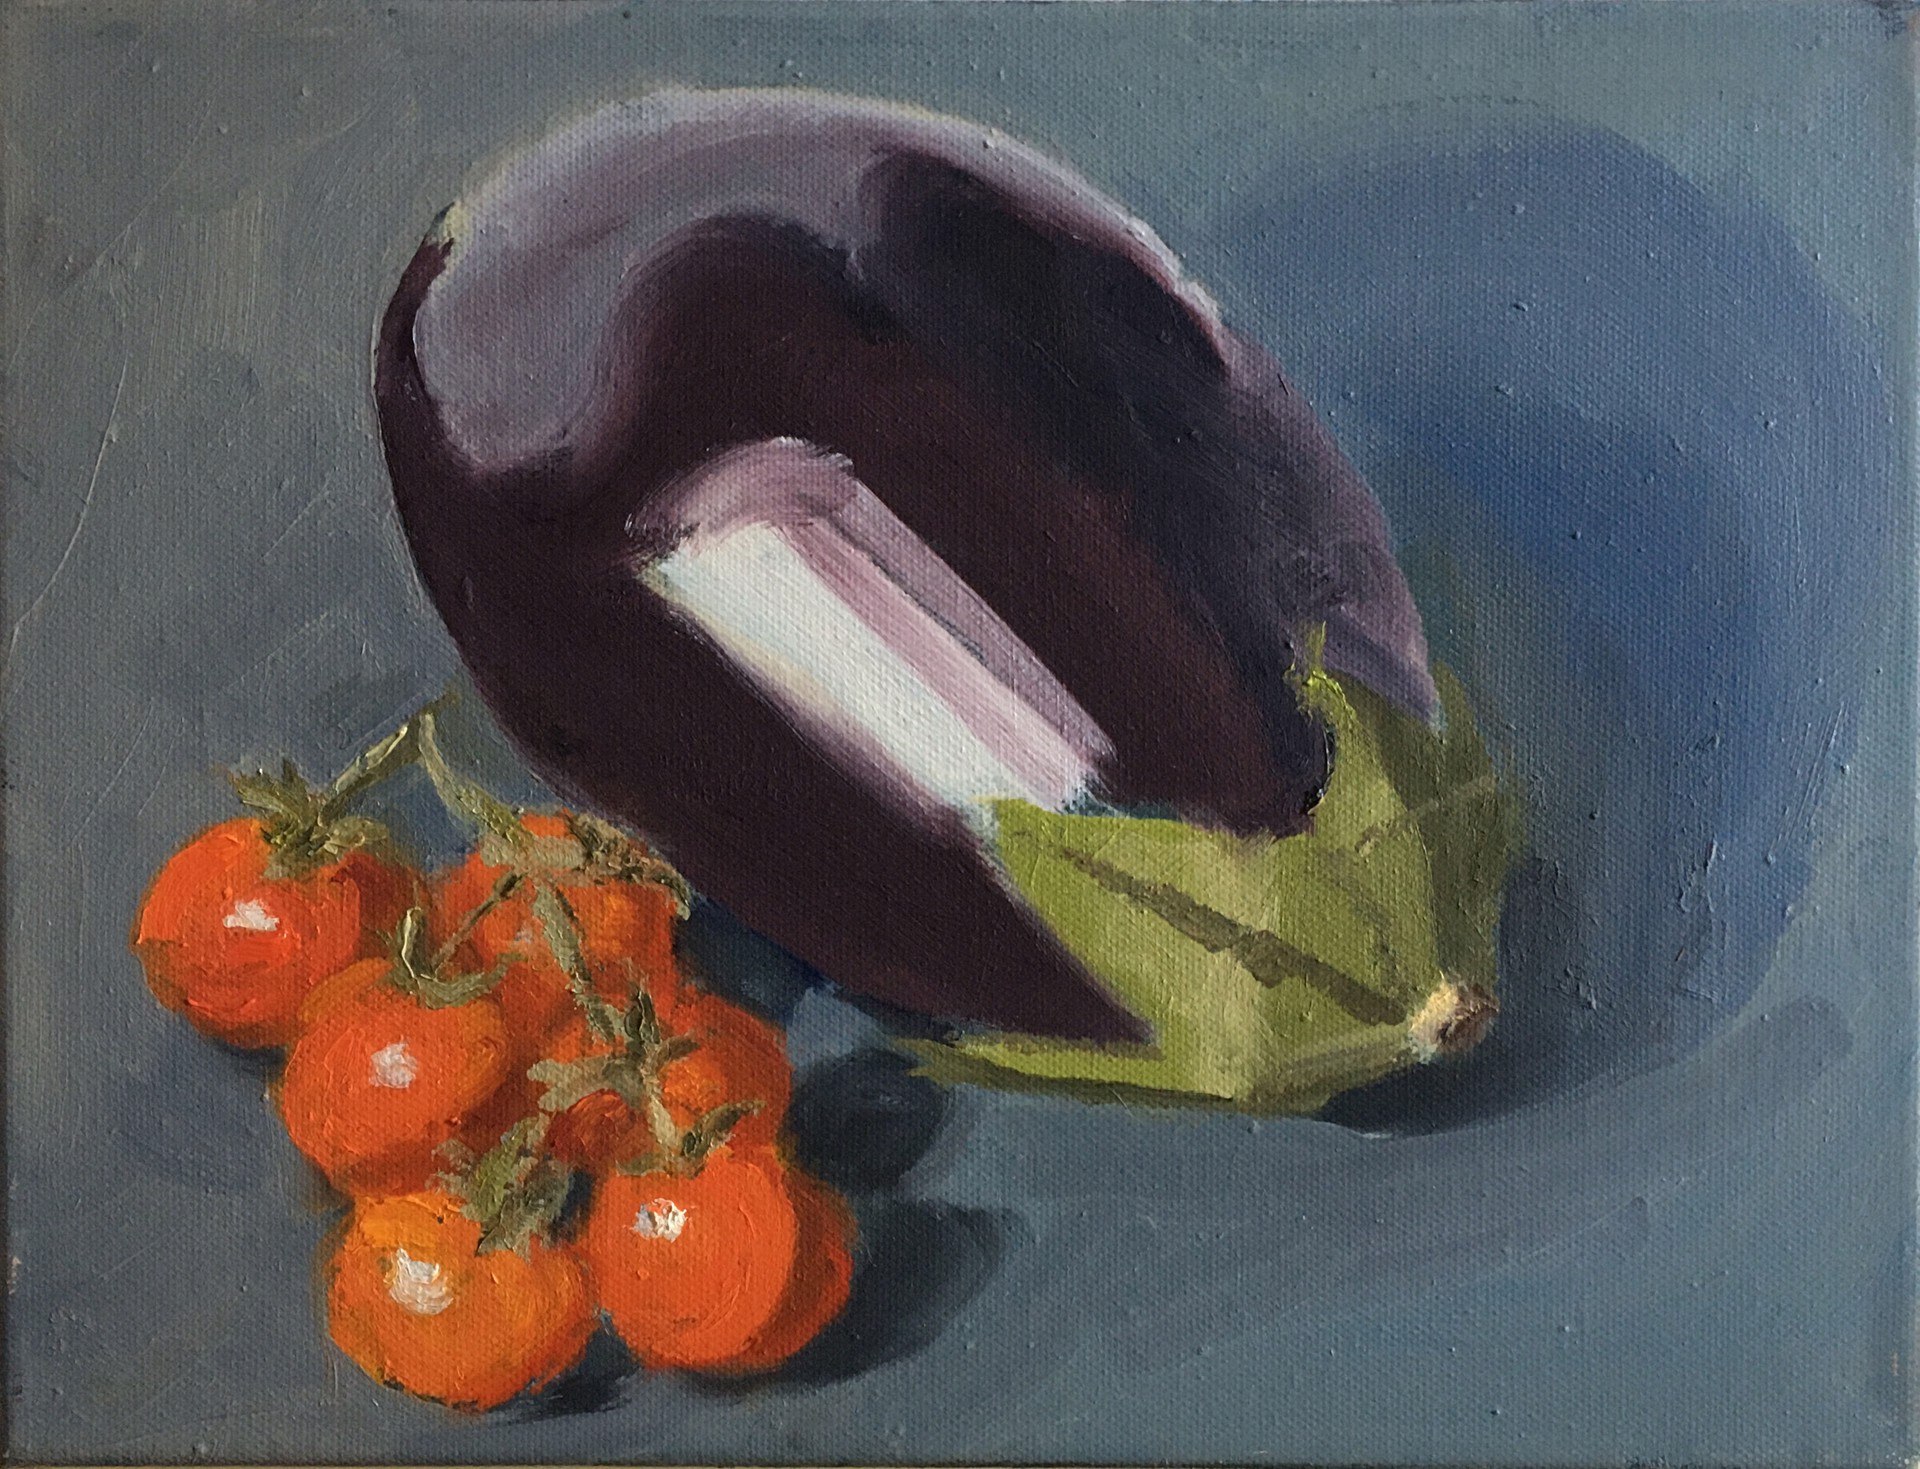 Tomatoes and Eggplant by Madeline Nelson